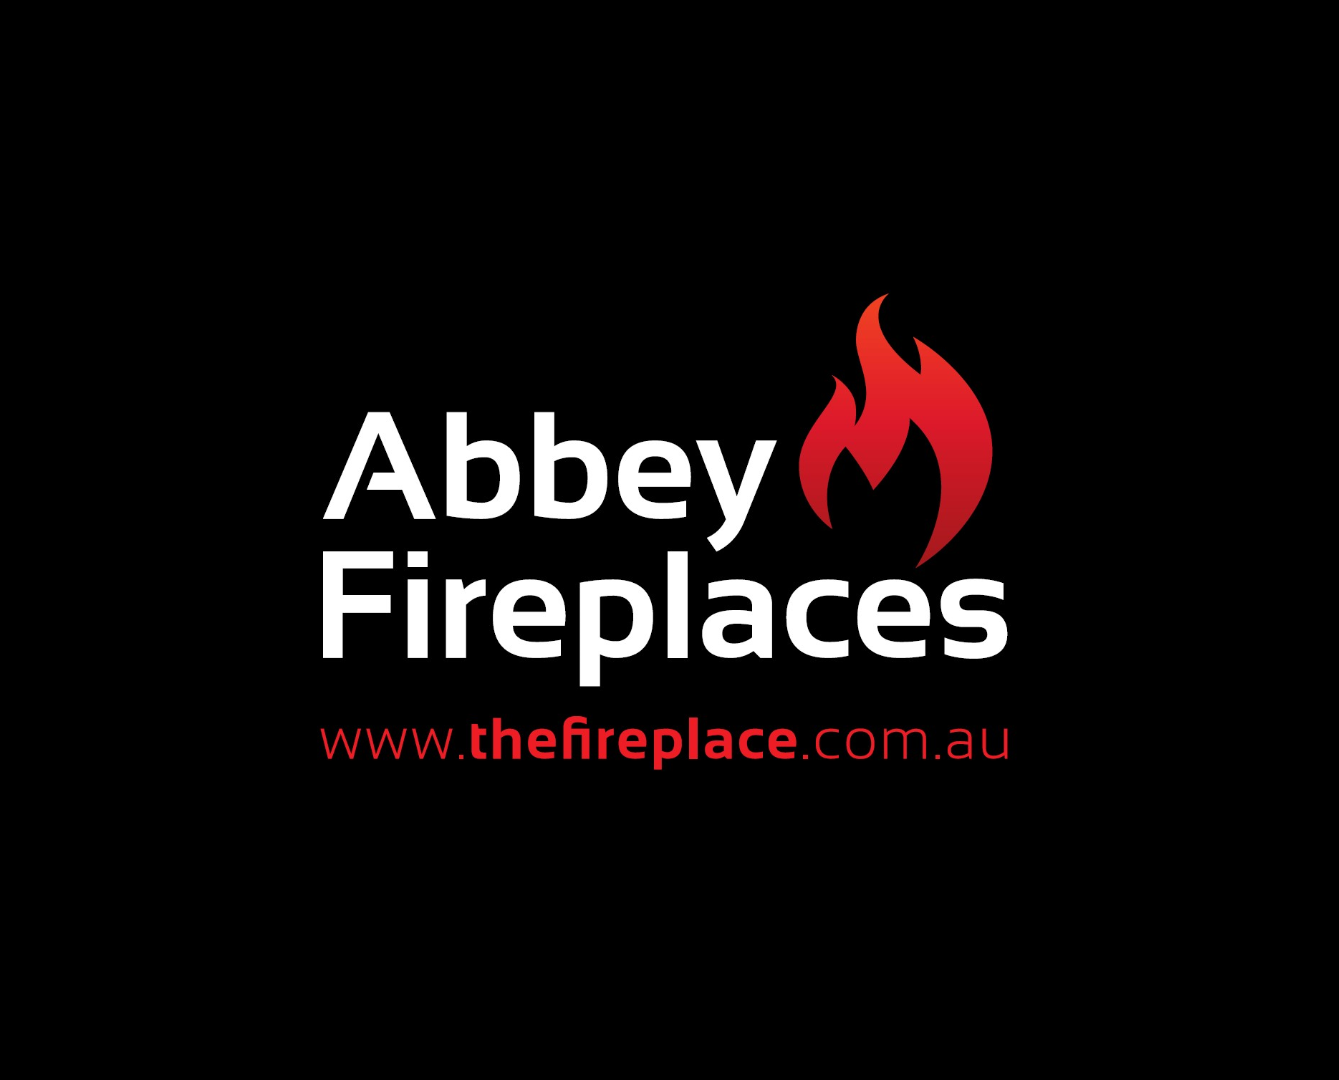 Abbey Fireplaces